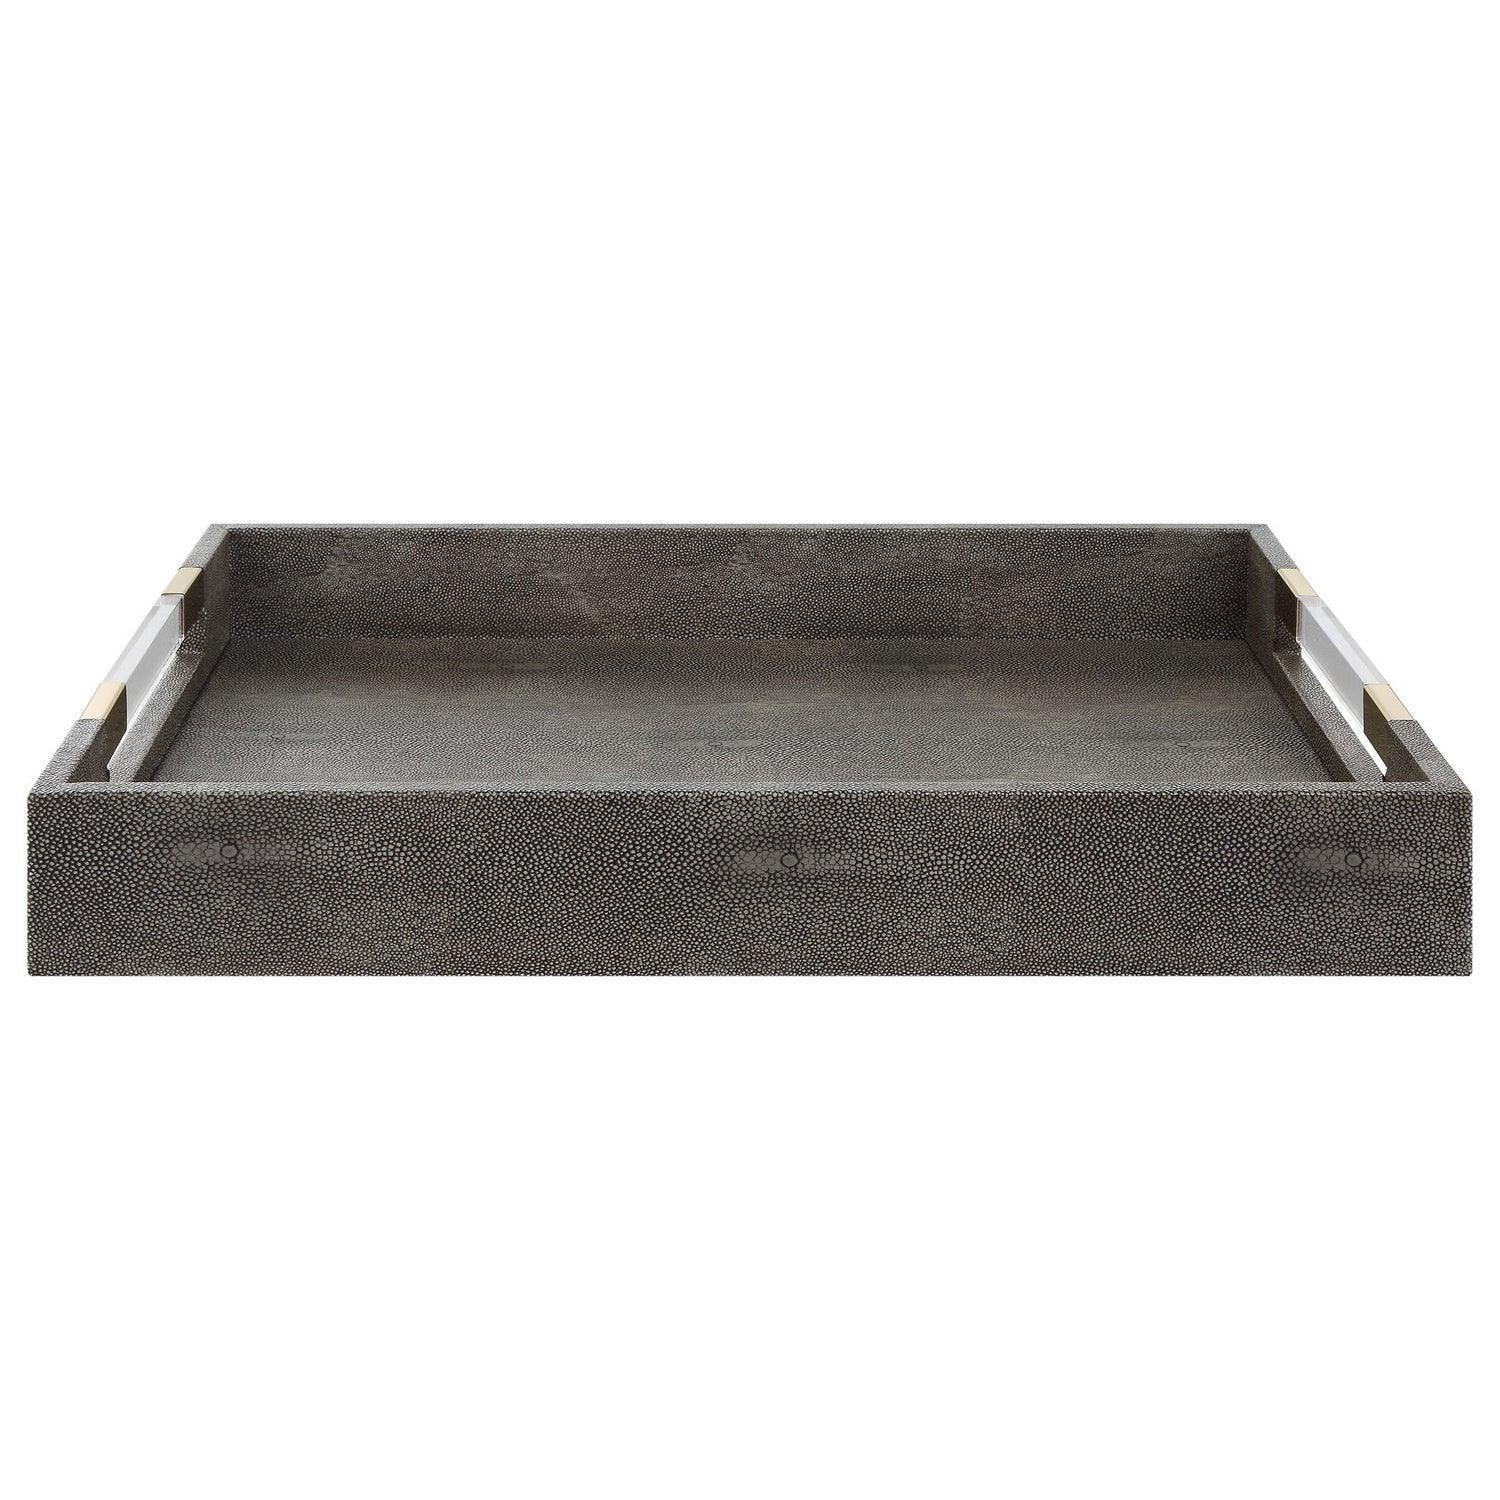 The Uttermost - Wessex Tray - 17996 | Montreal Lighting & Hardware